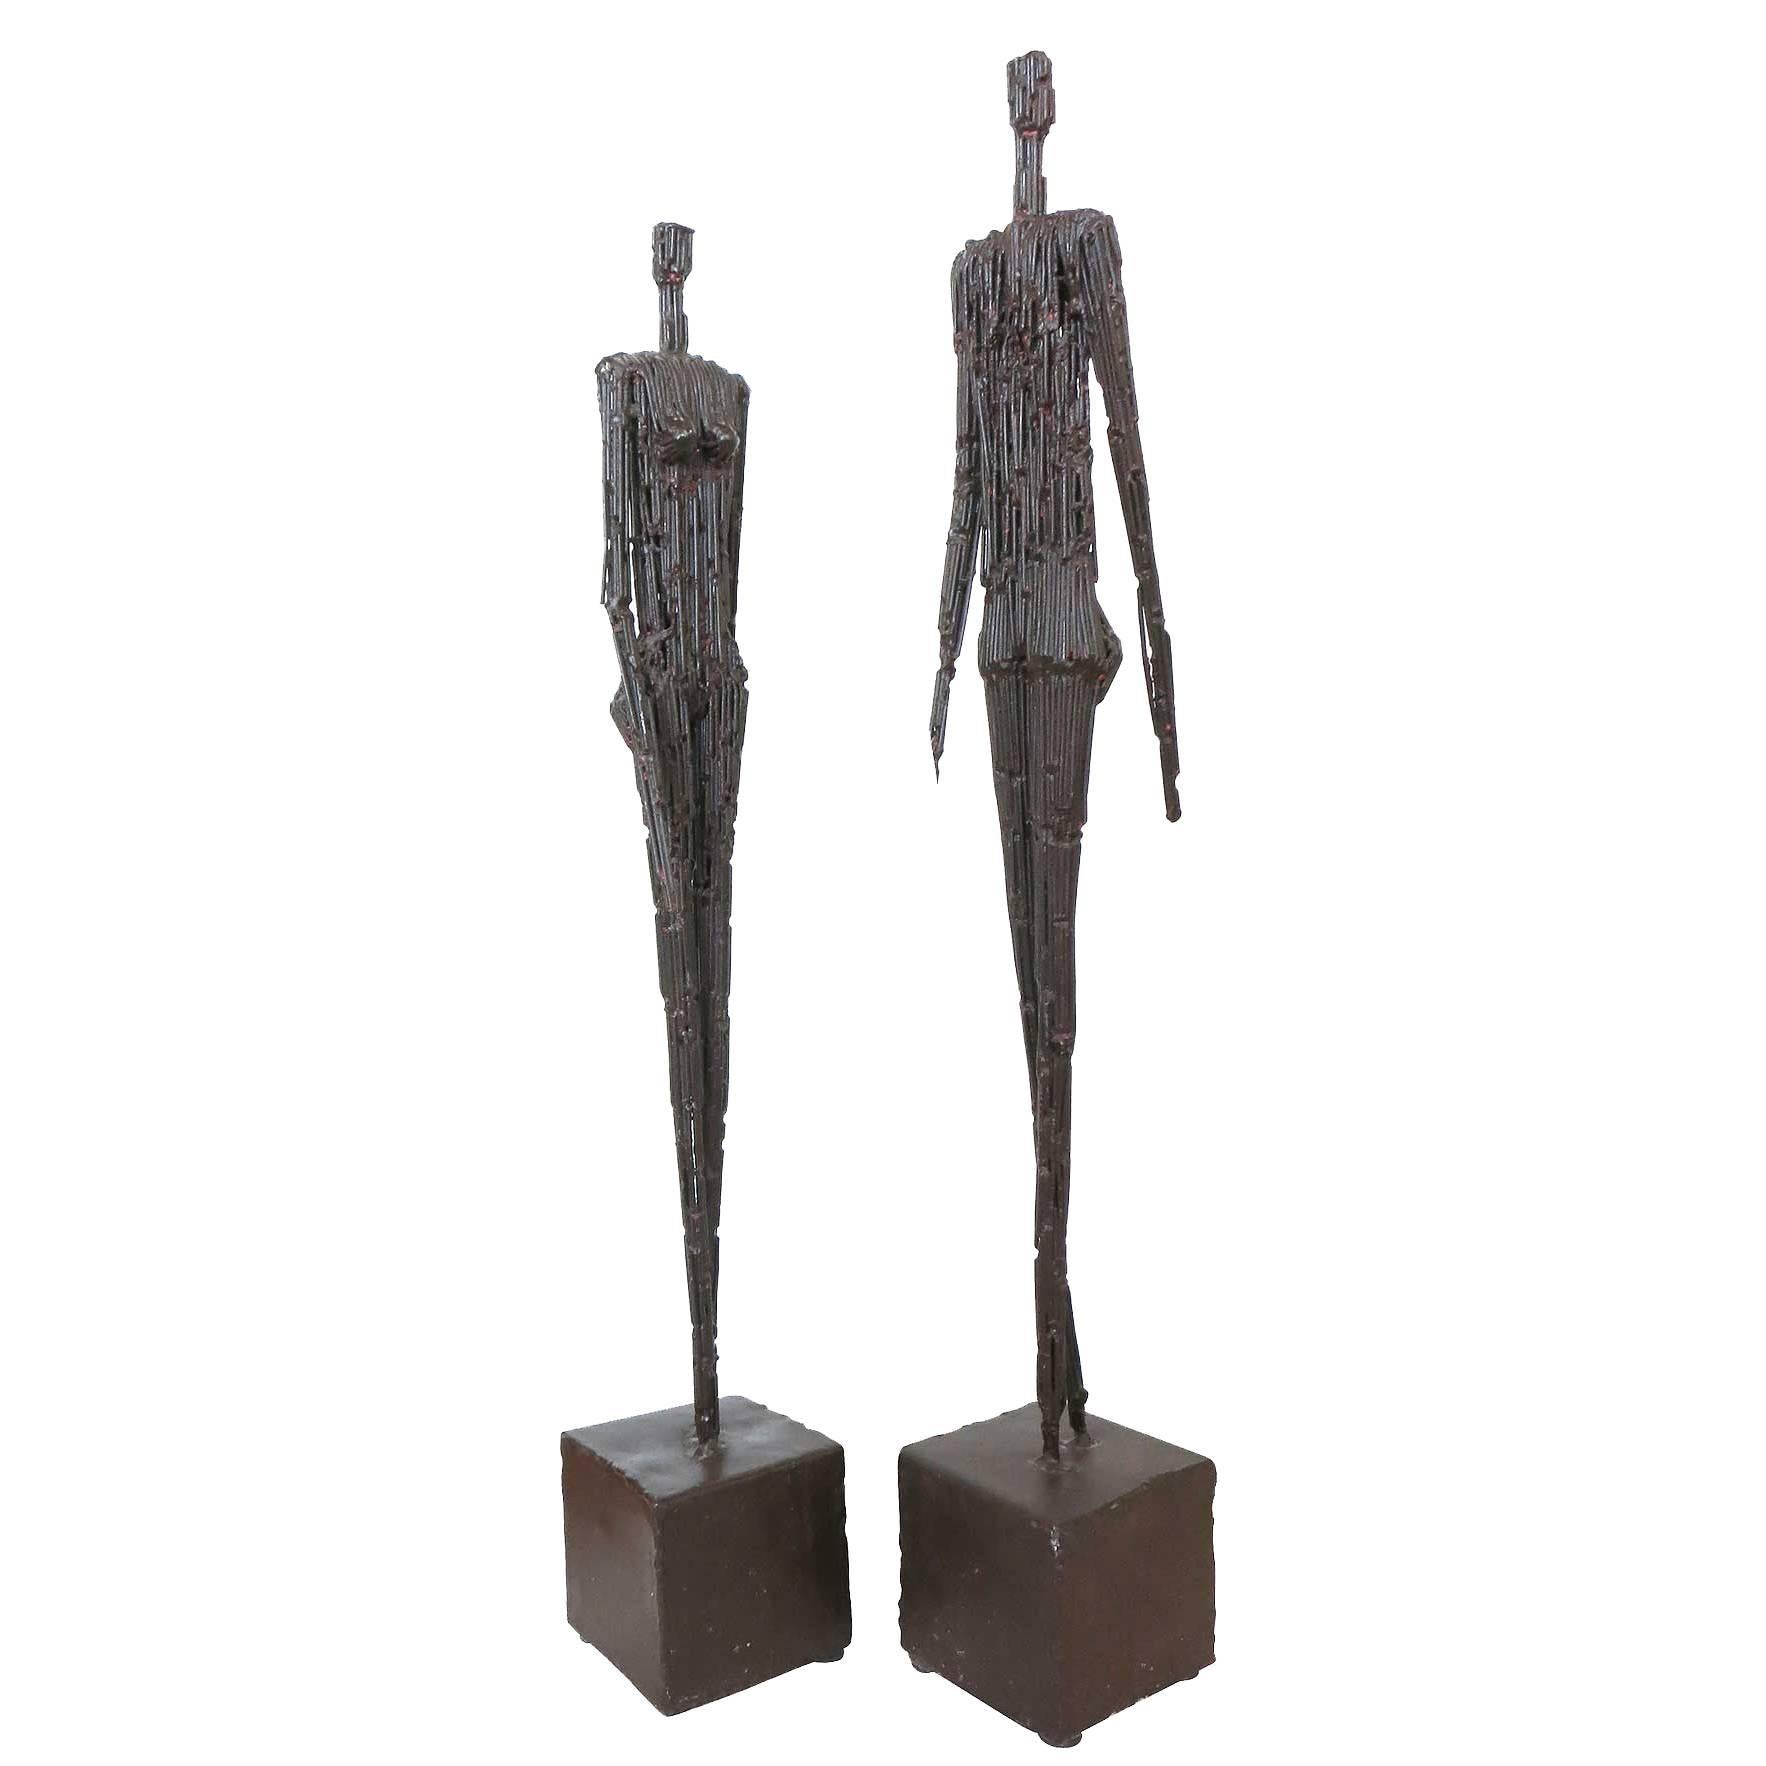 Pair of Nail Sculptures in the Manner of Giacometti